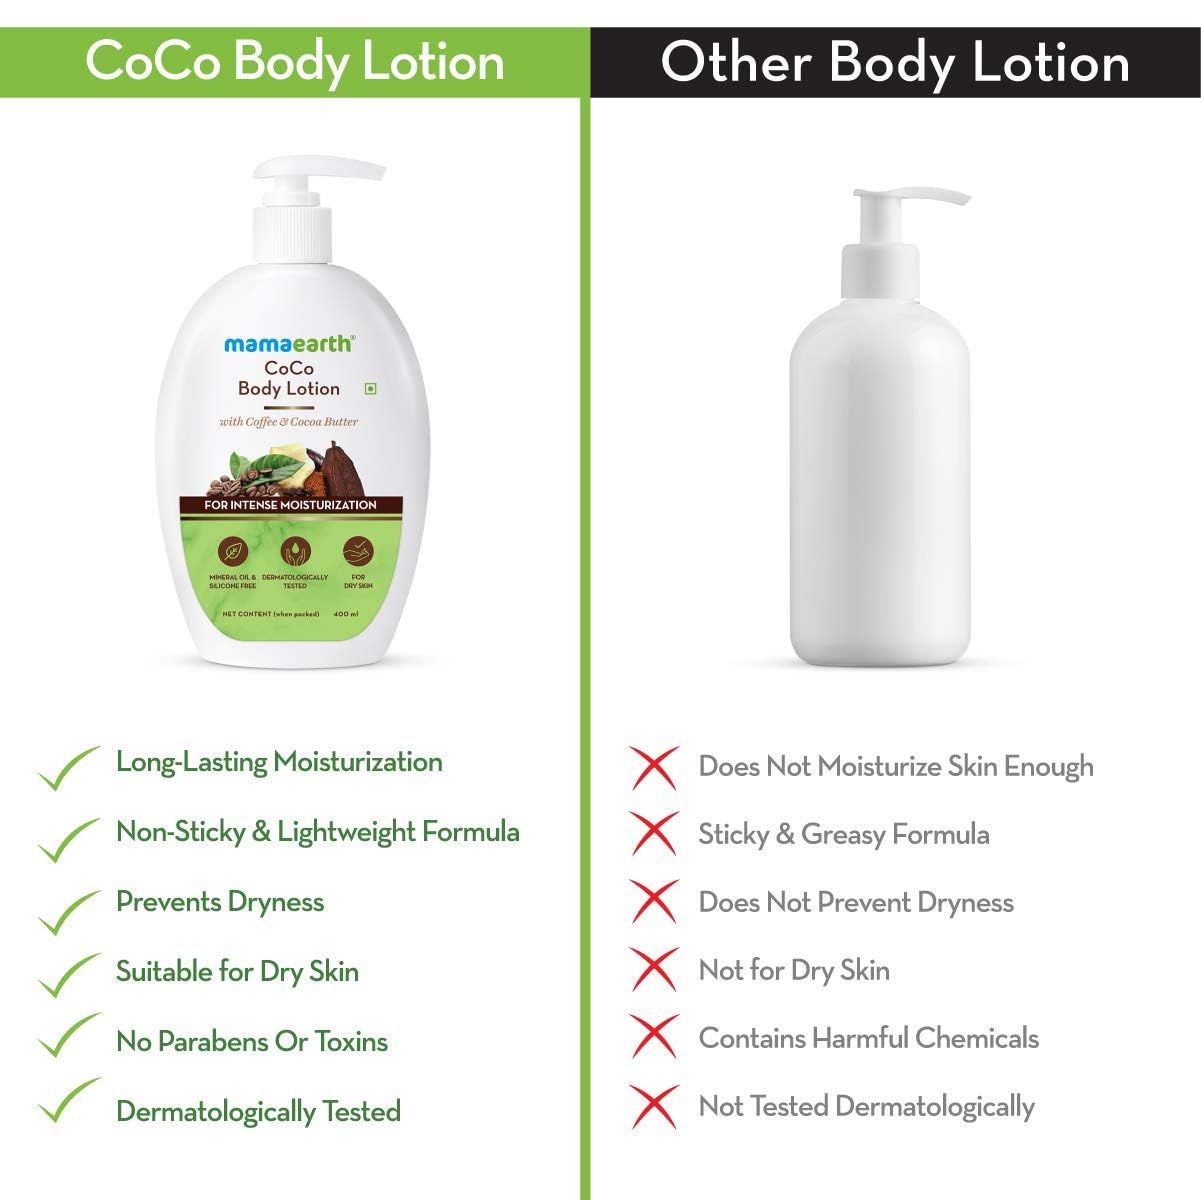 CoCo Body Lotion With Coffee and Cocoa for Intense Moisturization - 400ml